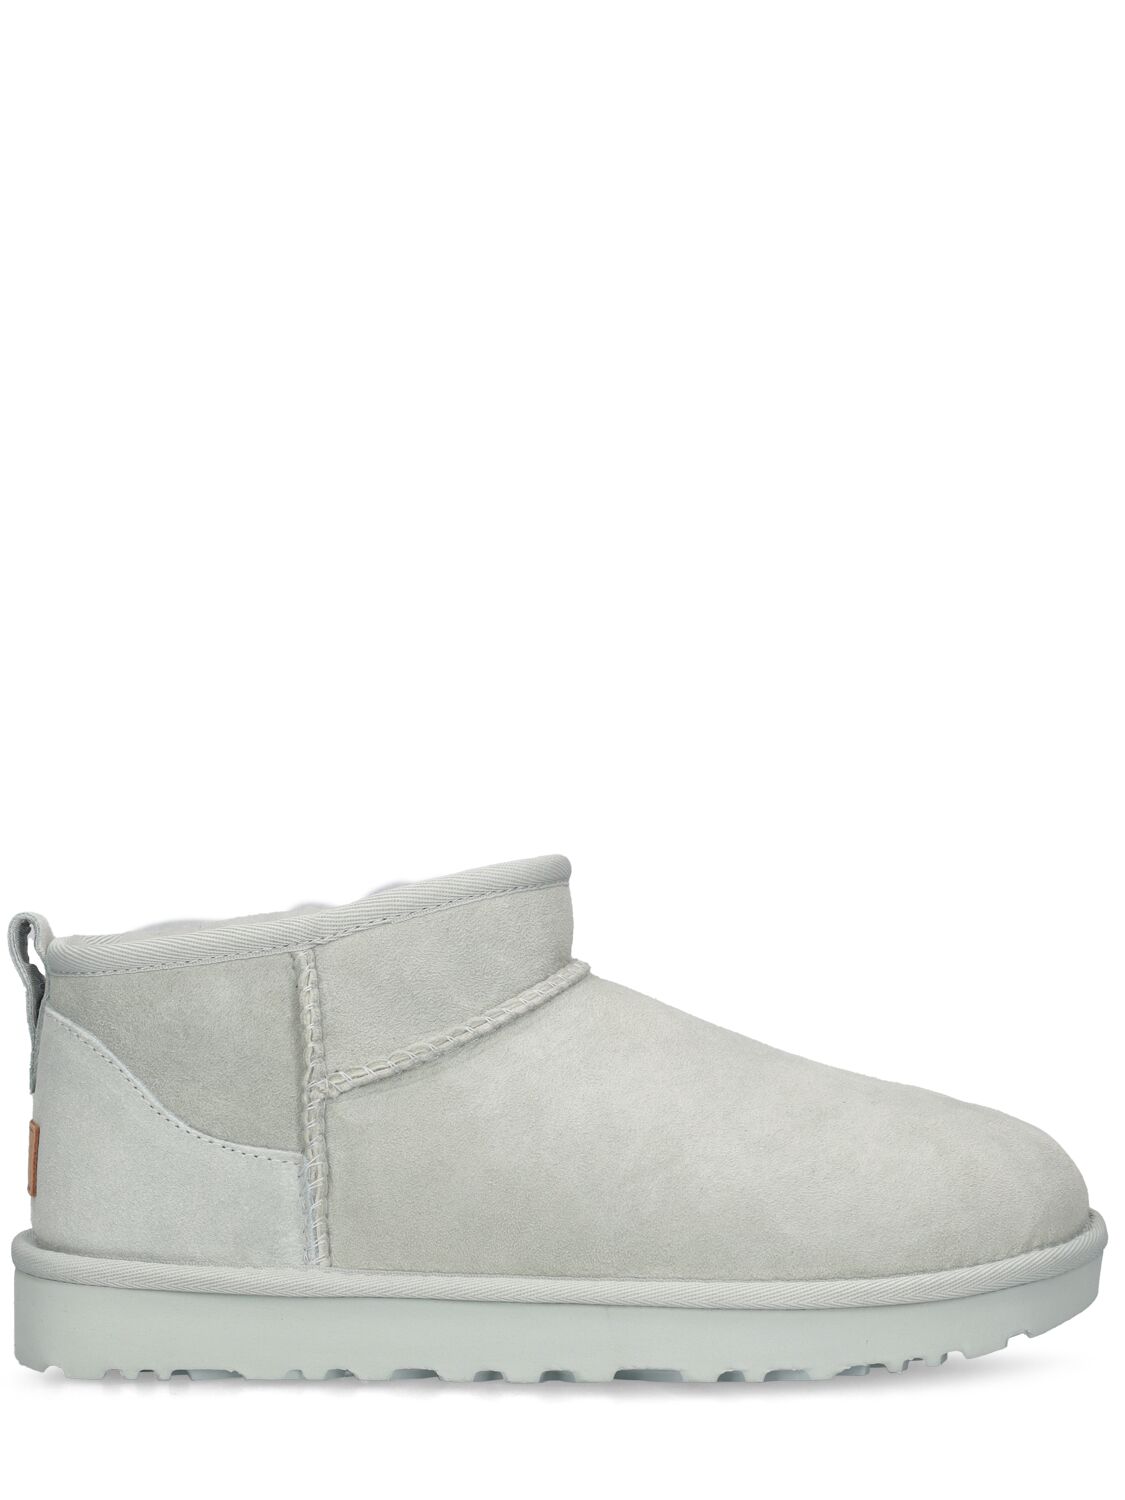 Ugg 10mm Classic Ultra Mini Shearling Boots In Off White